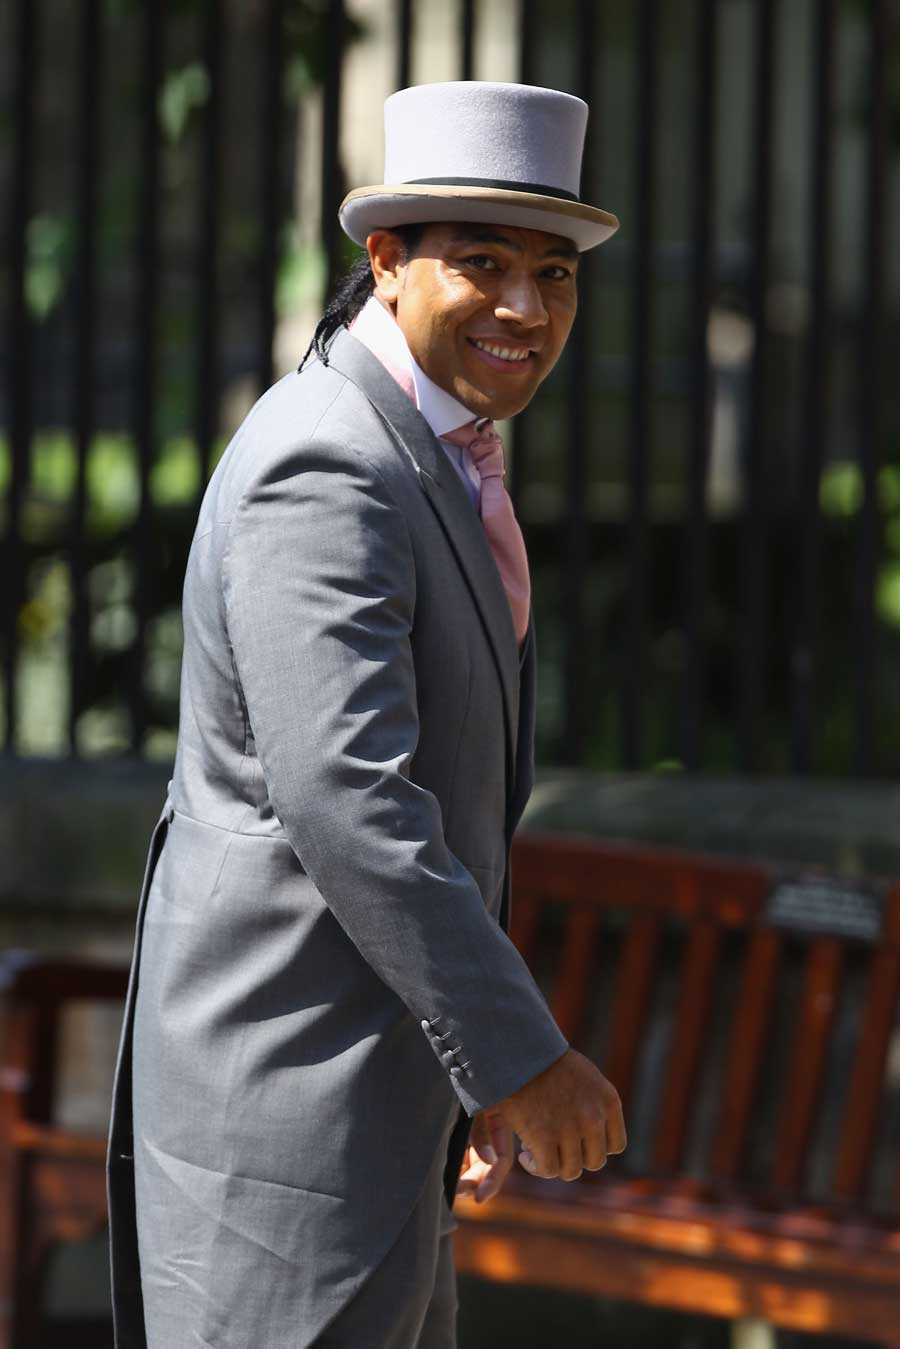 Lesley Vainikolo arrives for the wedding of Mike Tindall and Zara Phillips